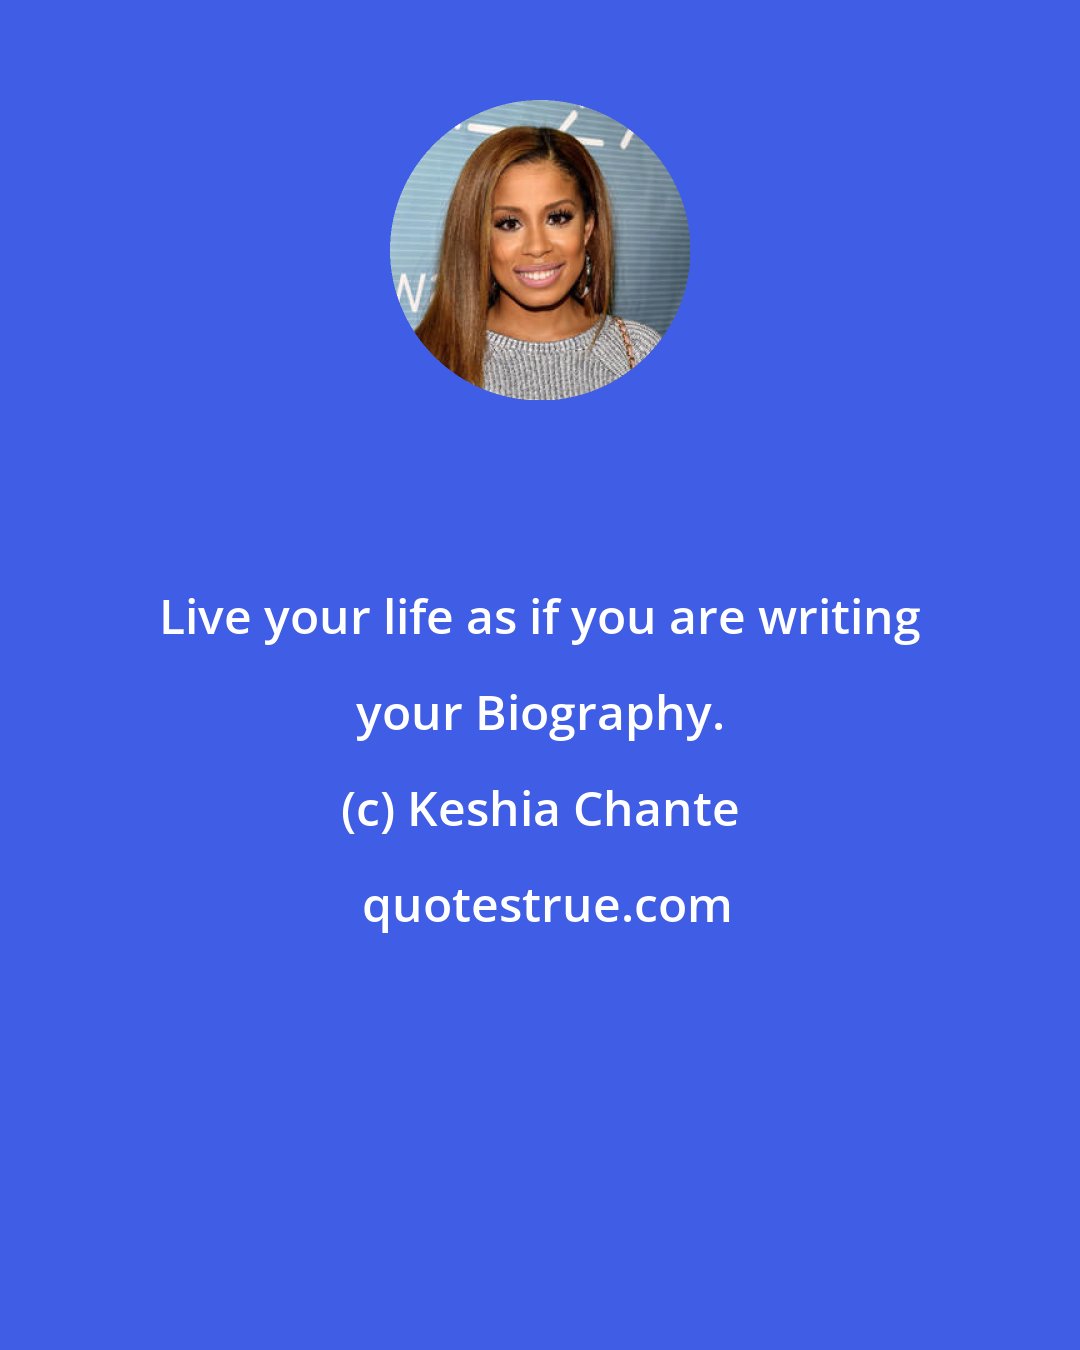 Keshia Chante: Live your life as if you are writing your Biography.